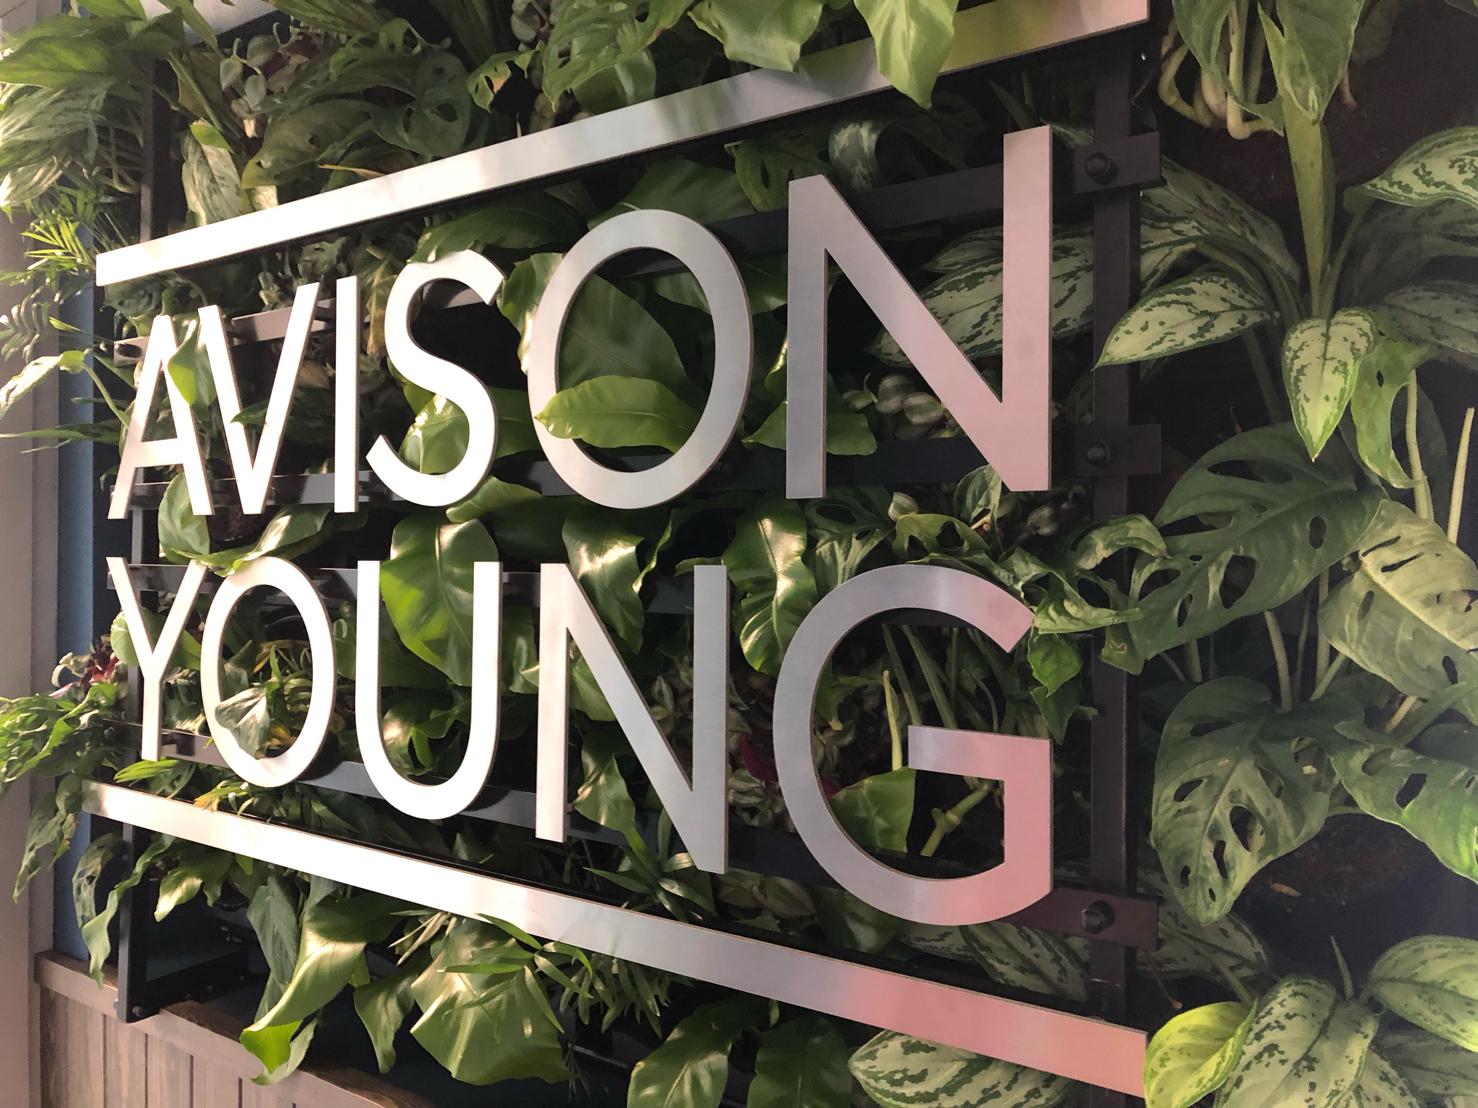 Avison Young living wall with sign